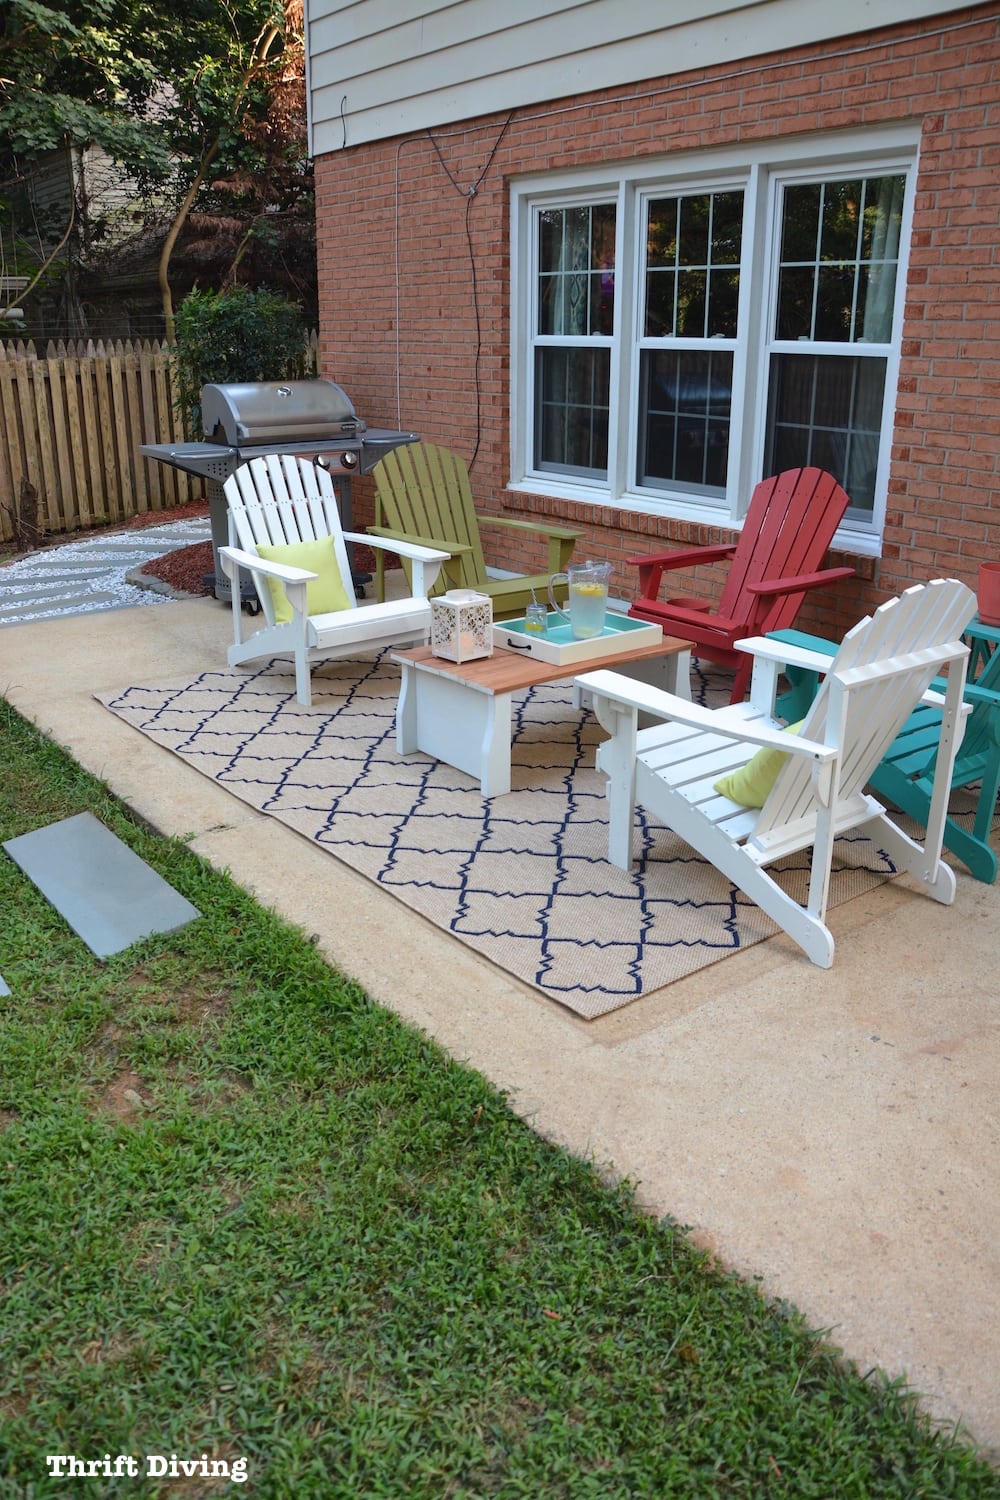 Patio Makeover Idea - Create walkway and painted Adirondack chairs - Thrift Diving72